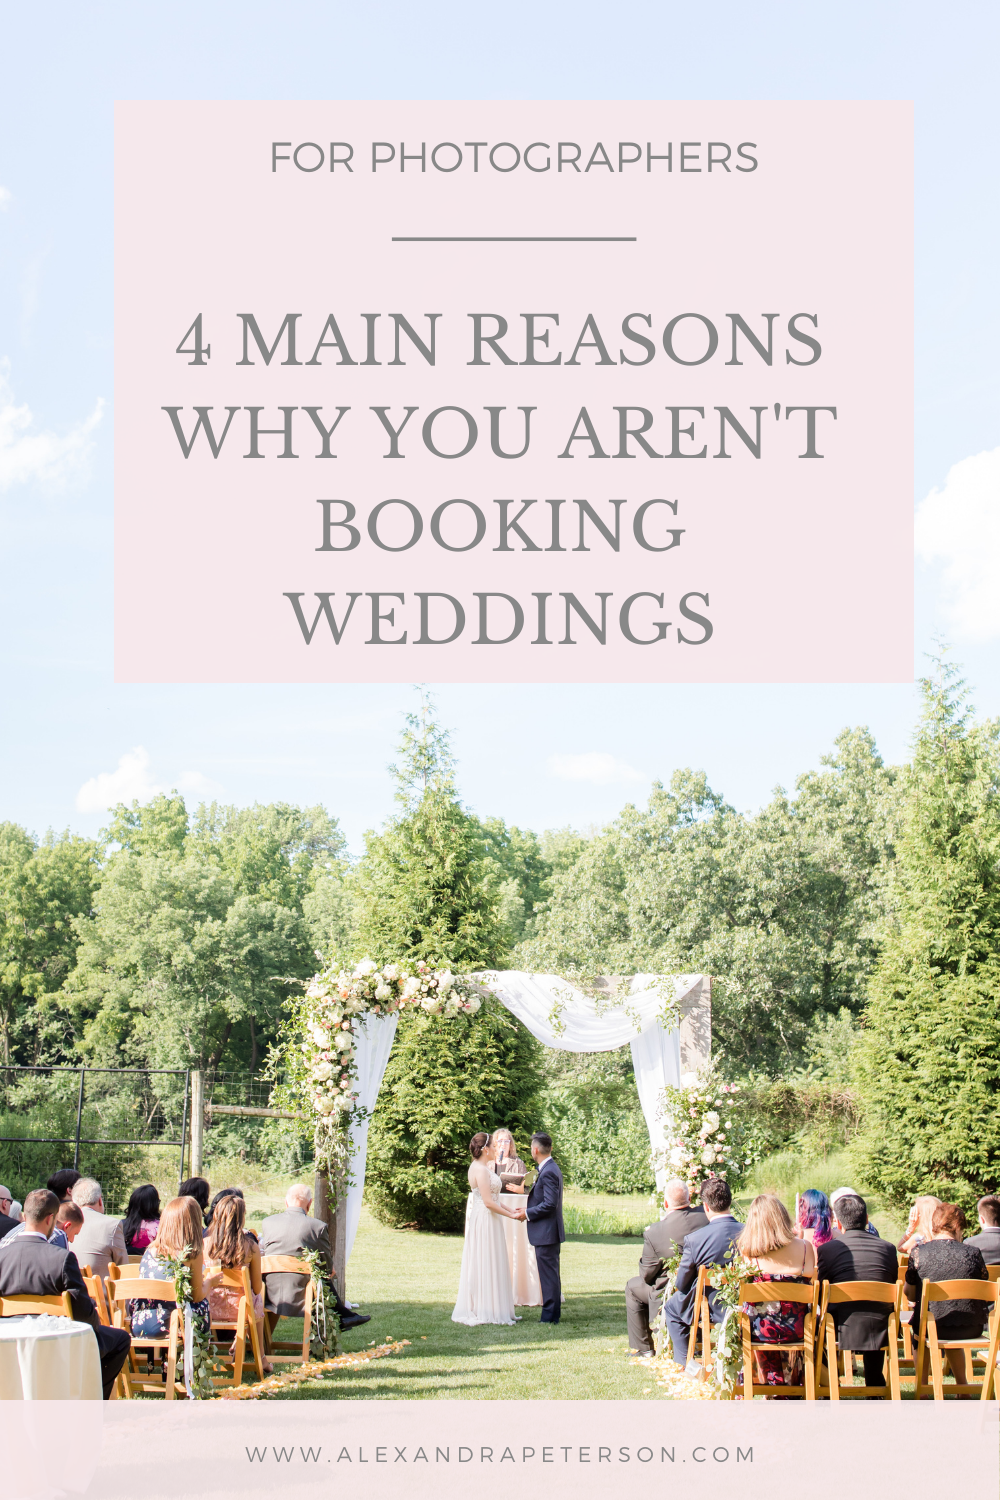 Reasons why you aren't booking weddings